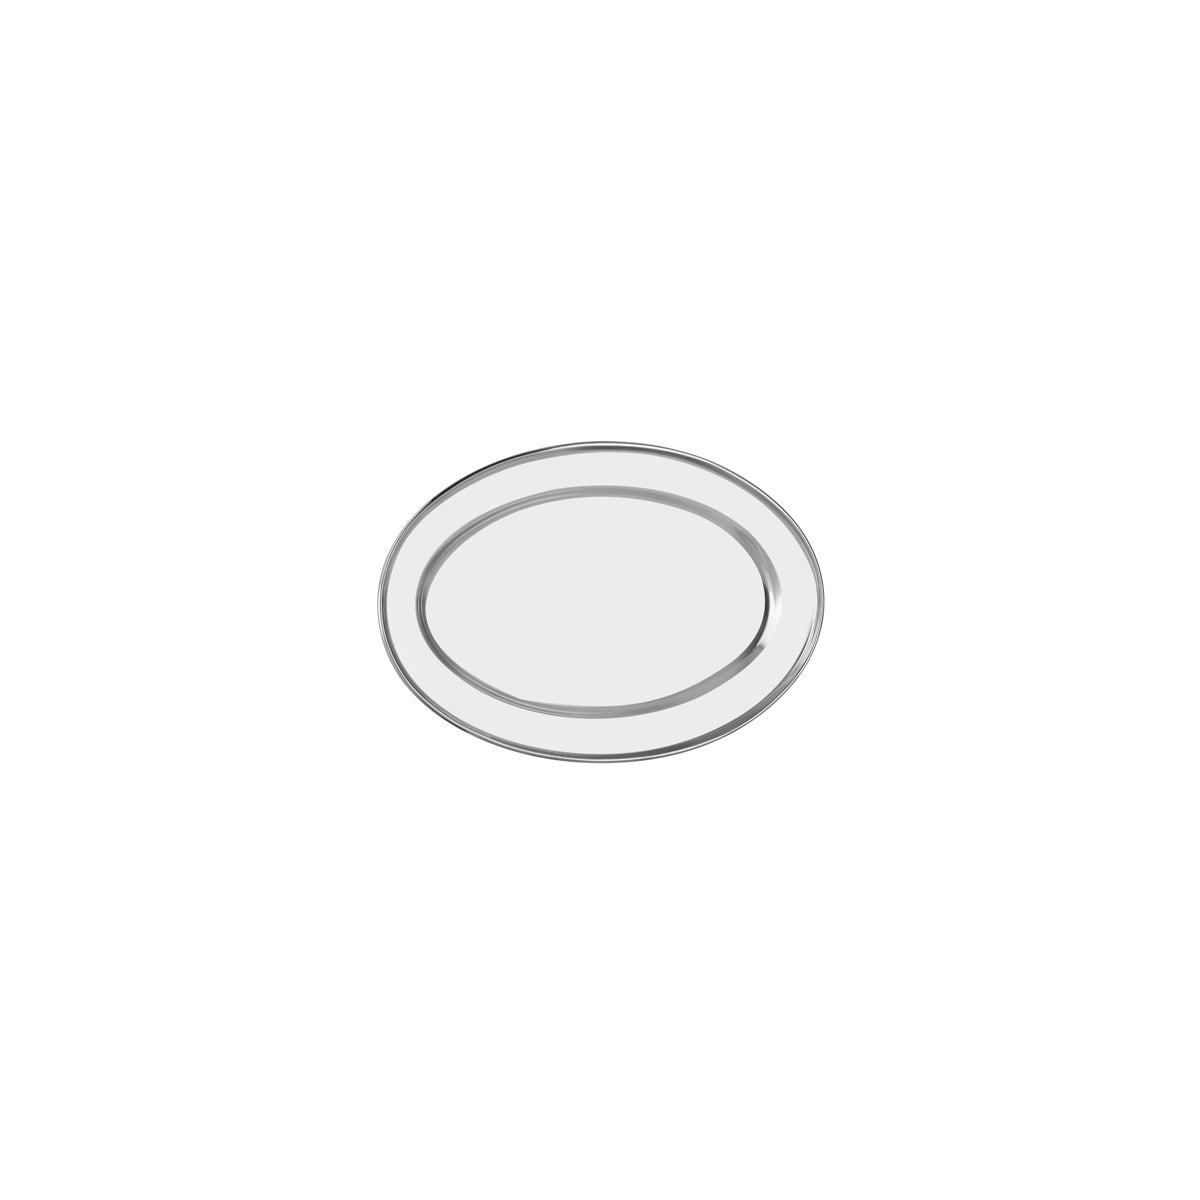 70710 Chef Inox Oval Platter Rolled Edge Stainless Steel 260x200mm Tomkin Australia Hospitality Supplies